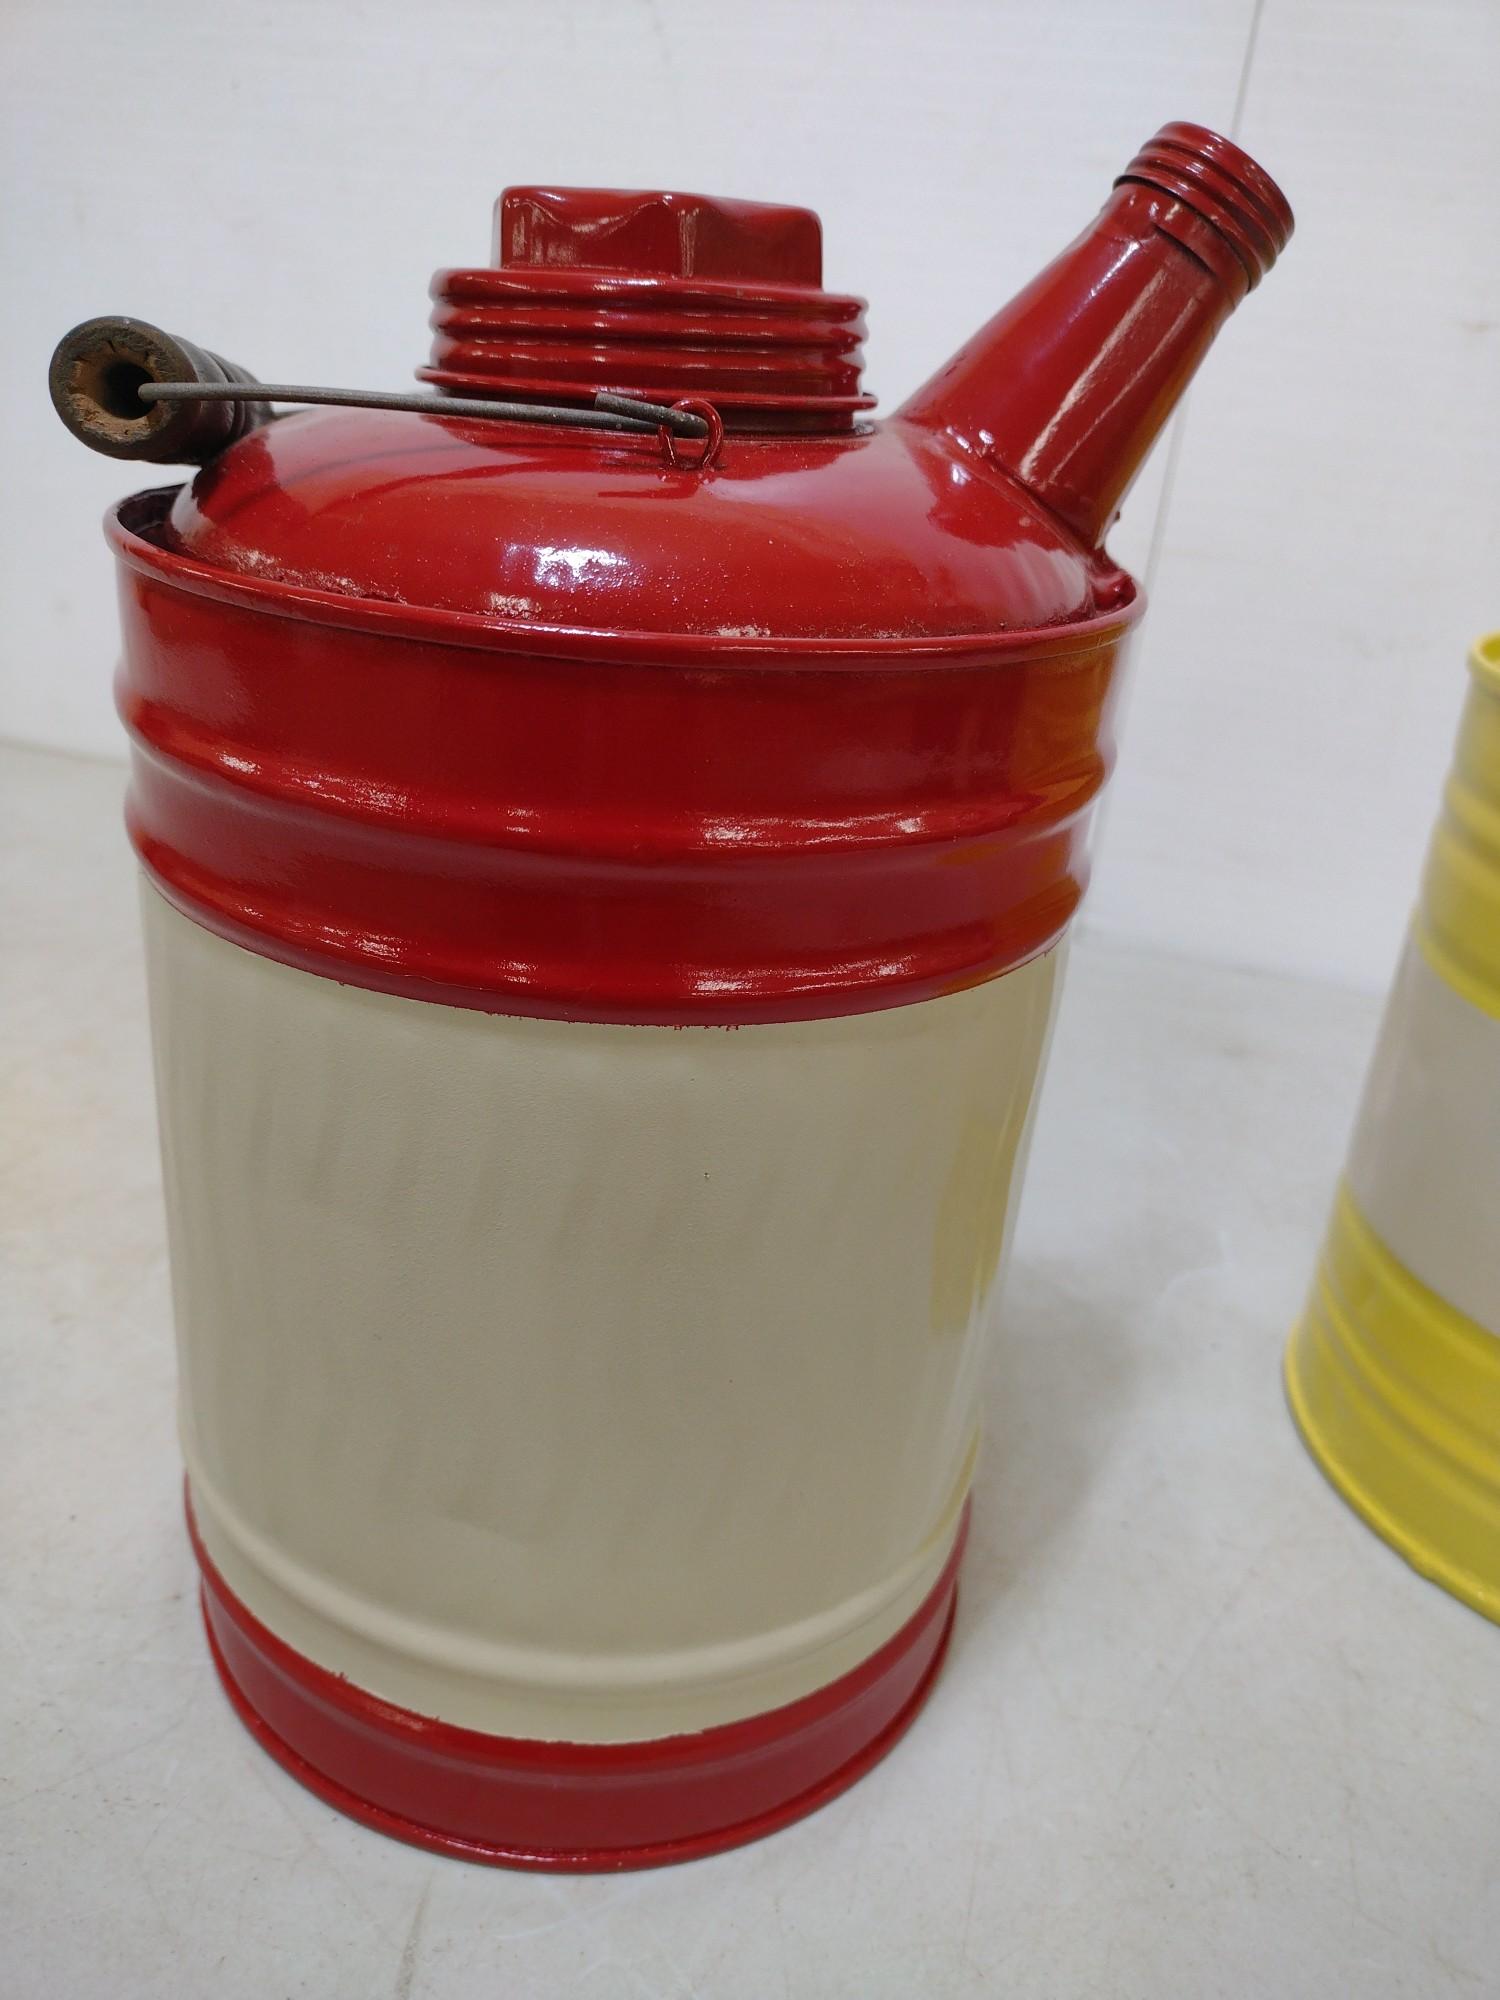 2 Vintage One Gallon Gas Cans